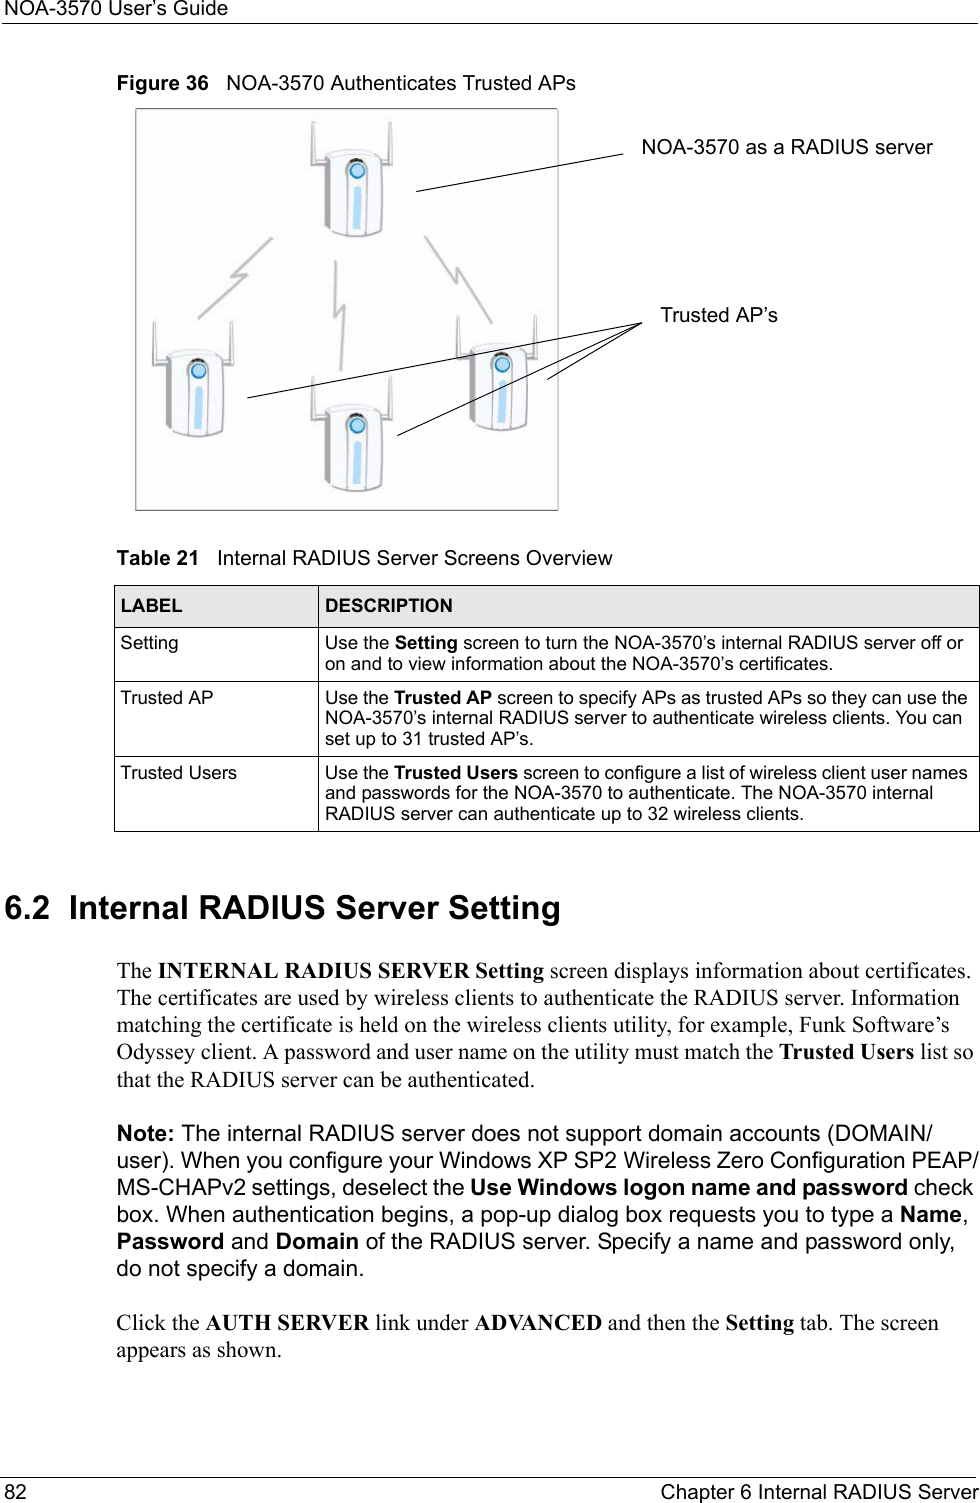 NOA-3570 User’s Guide82 Chapter 6 Internal RADIUS ServerFigure 36   NOA-3570 Authenticates Trusted APs6.2  Internal RADIUS Server SettingThe INTERNAL RADIUS SERVER Setting screen displays information about certificates. The certificates are used by wireless clients to authenticate the RADIUS server. Information matching the certificate is held on the wireless clients utility, for example, Funk Software’s Odyssey client. A password and user name on the utility must match the Trusted Users list so that the RADIUS server can be authenticated.Note: The internal RADIUS server does not support domain accounts (DOMAIN/user). When you configure your Windows XP SP2 Wireless Zero Configuration PEAP/MS-CHAPv2 settings, deselect the Use Windows logon name and password check box. When authentication begins, a pop-up dialog box requests you to type a Name, Password and Domain of the RADIUS server. Specify a name and password only, do not specify a domain.Click the AUTH SERVER link under ADVANCED and then the Setting tab. The screen appears as shown.Table 21   Internal RADIUS Server Screens OverviewLABEL  DESCRIPTIONSetting Use the Setting screen to turn the NOA-3570’s internal RADIUS server off or on and to view information about the NOA-3570’s certificates.Trusted AP Use the Trusted AP screen to specify APs as trusted APs so they can use the NOA-3570’s internal RADIUS server to authenticate wireless clients. You can set up to 31 trusted AP’s.Trusted Users Use the Trusted Users screen to configure a list of wireless client user names and passwords for the NOA-3570 to authenticate. The NOA-3570 internal RADIUS server can authenticate up to 32 wireless clients.NOA-3570 as a RADIUS serverTrusted AP’s